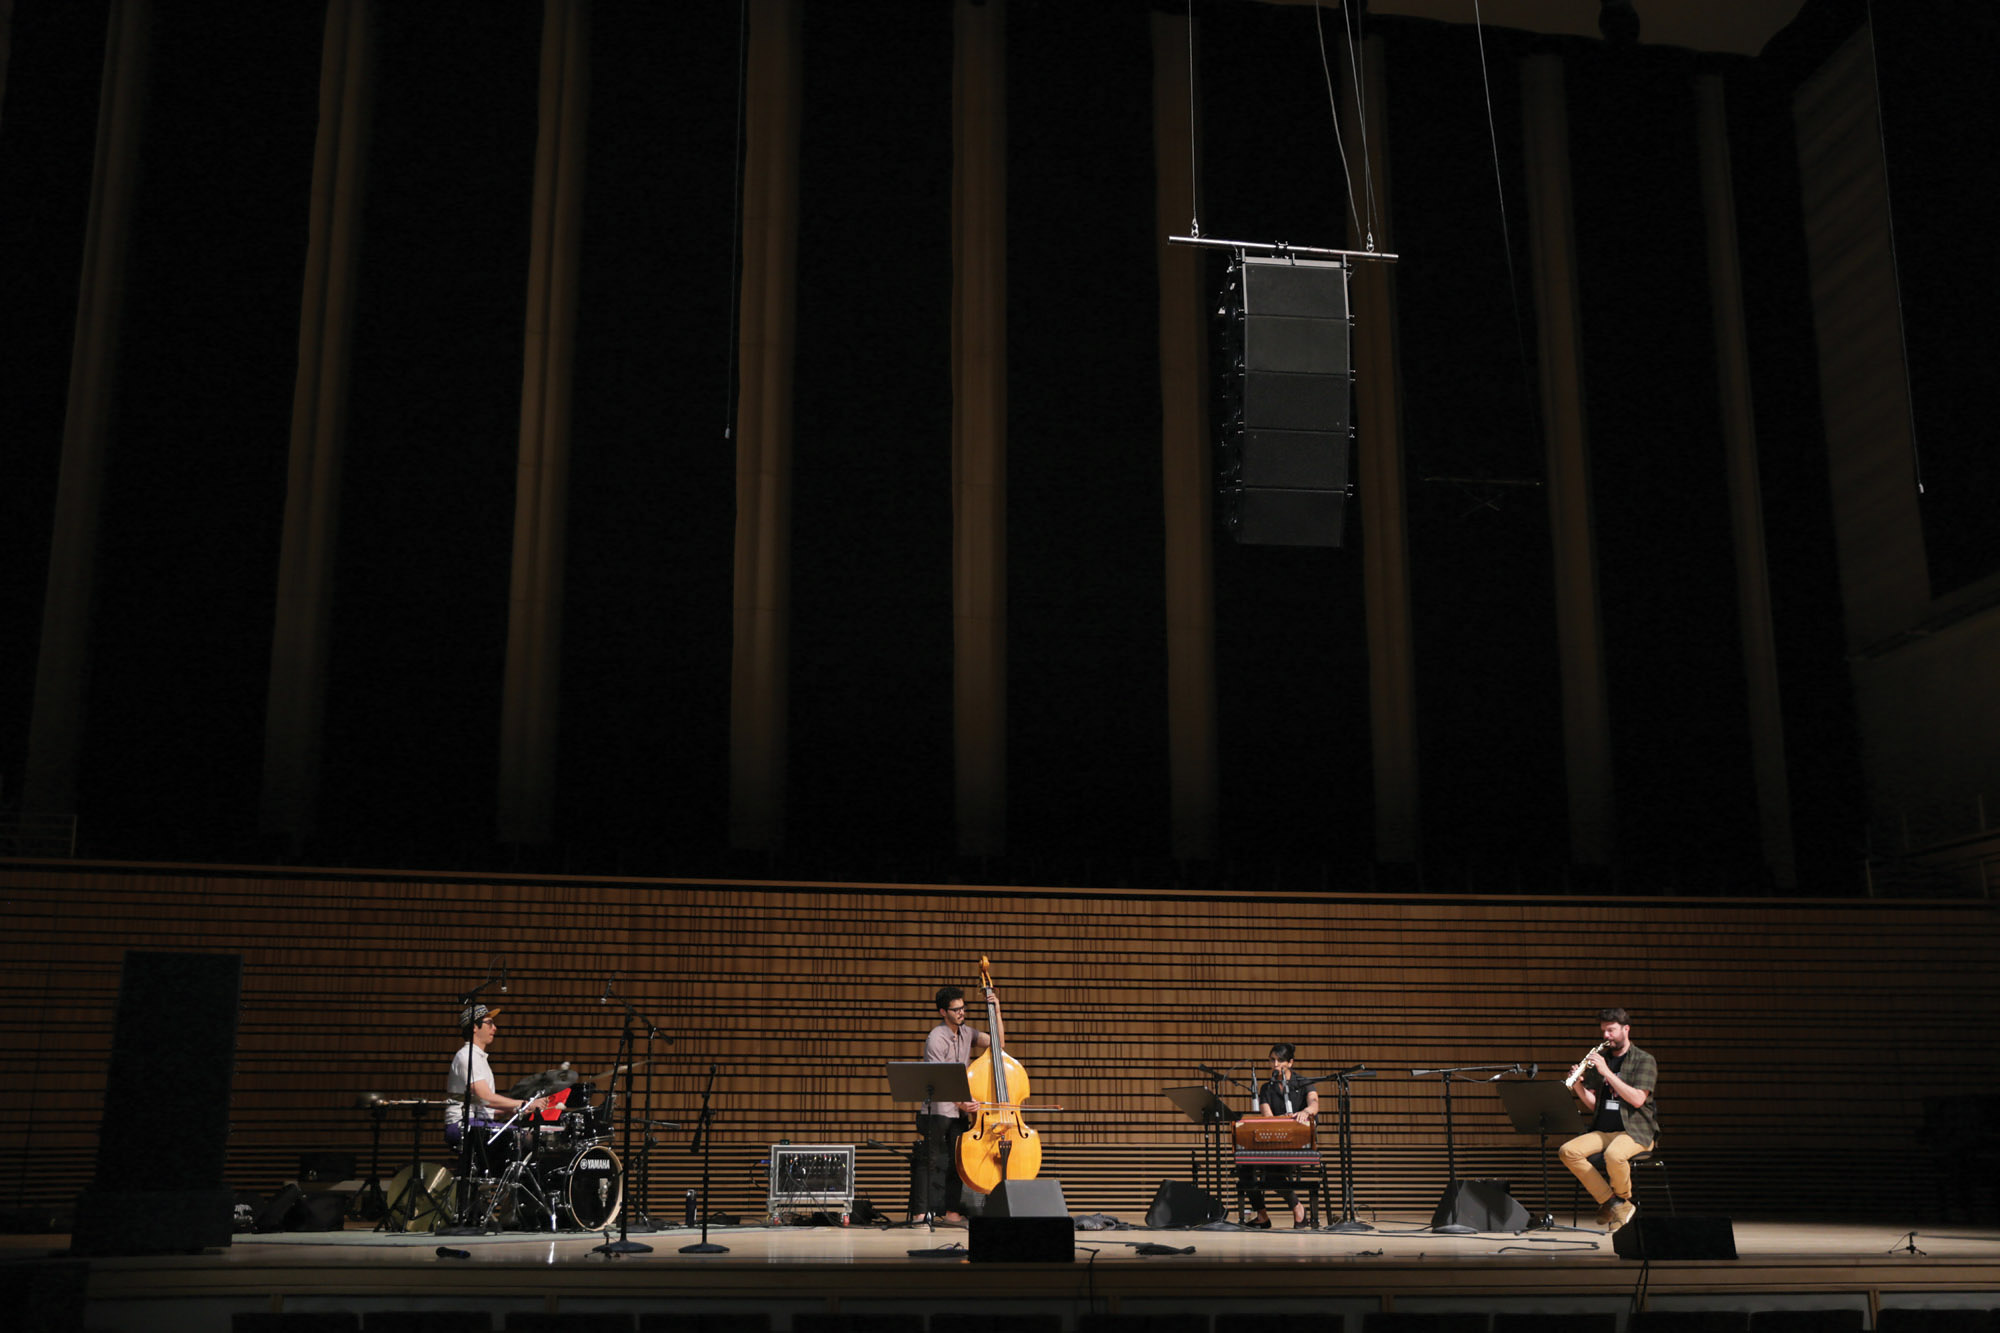 A quartet playing spread out across the concert hall stage. 